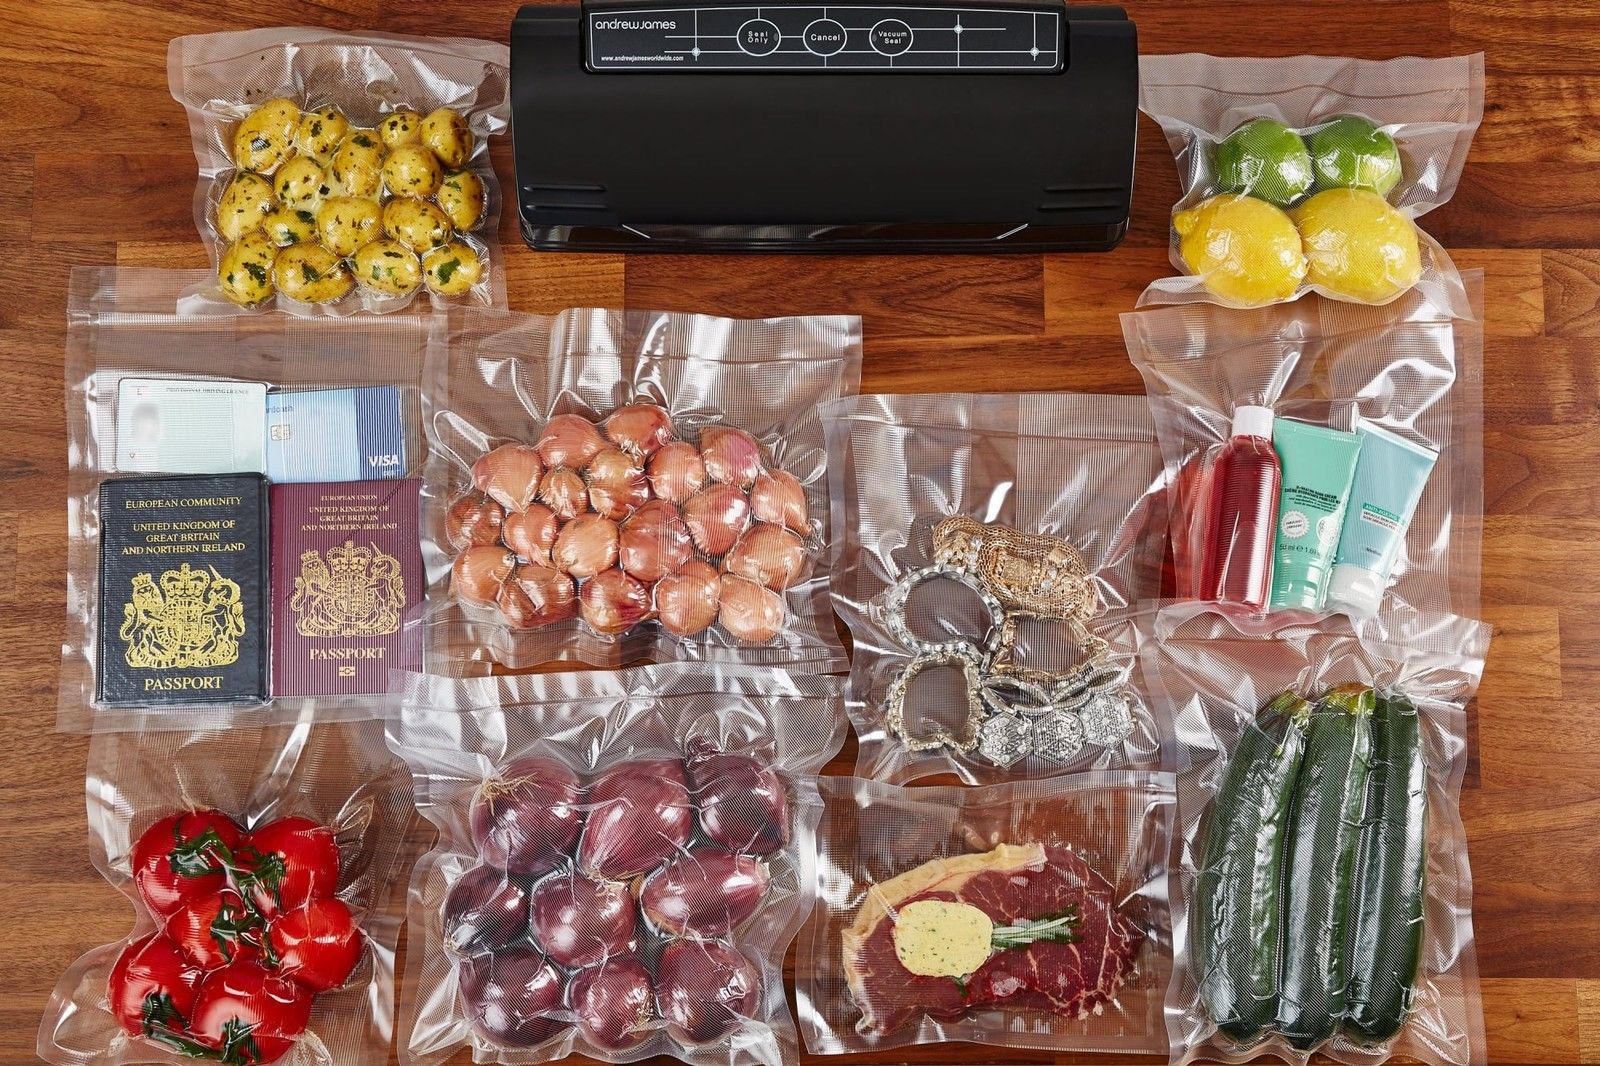 The Magic Vacuum Sealer Helps to Preserve Food and Store Document